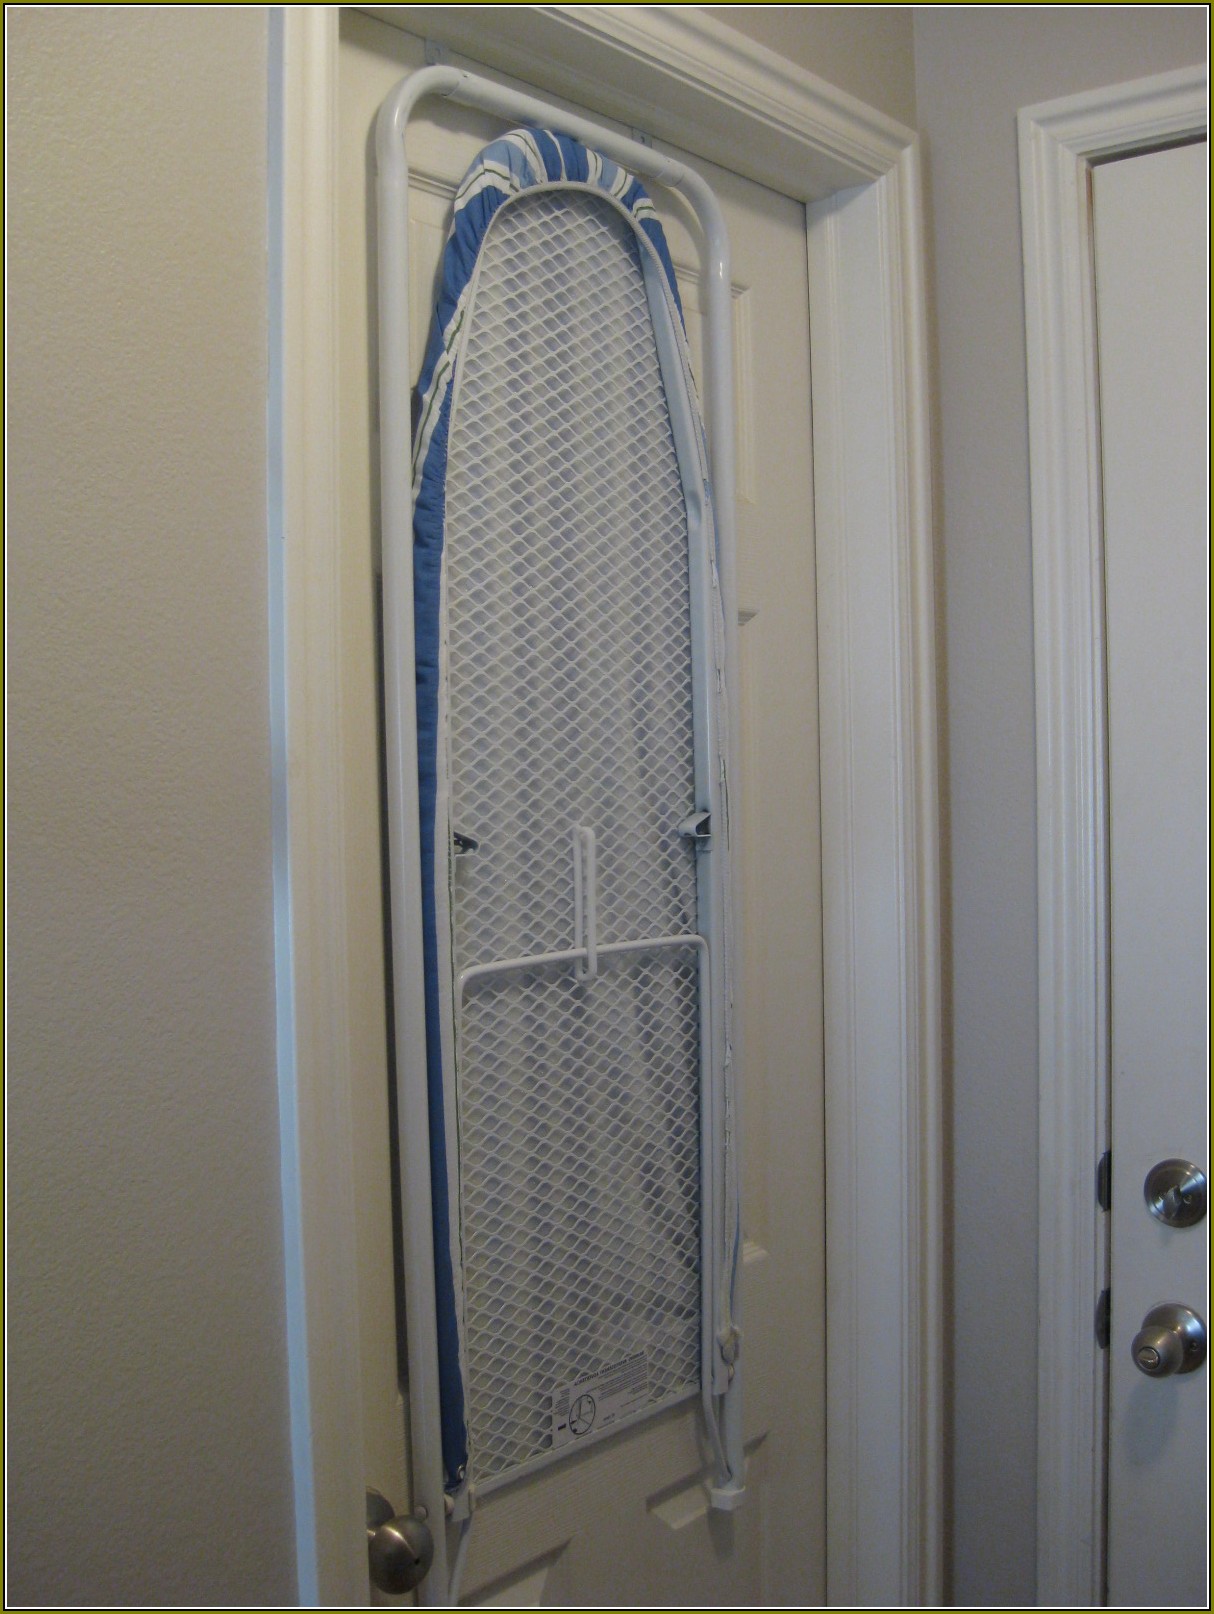 Wall Mounted Ironing Board Cabinet Plans